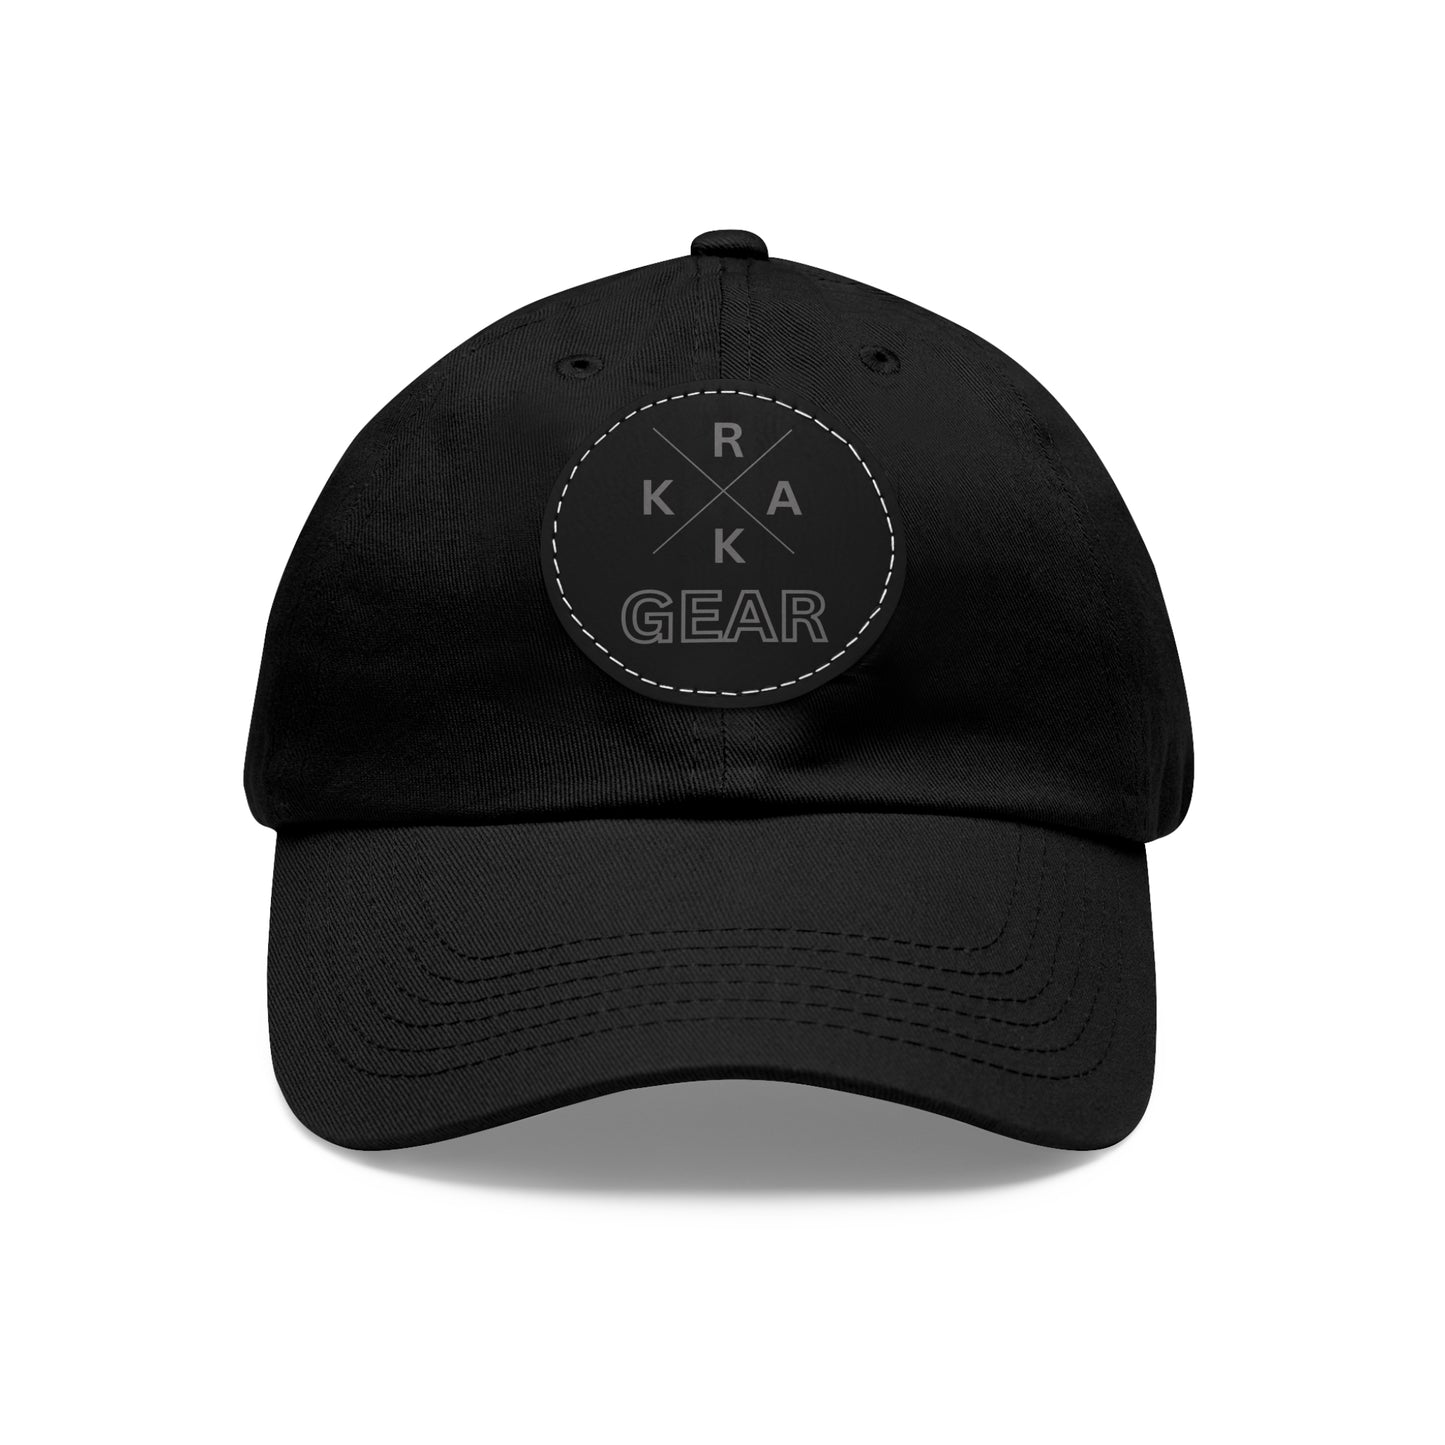 Rakkgear Black Hat with Black Leather X Logo Patch: Cap featuring the iconic Rakkgear X Logo on a finely embroidered leather patch on the front